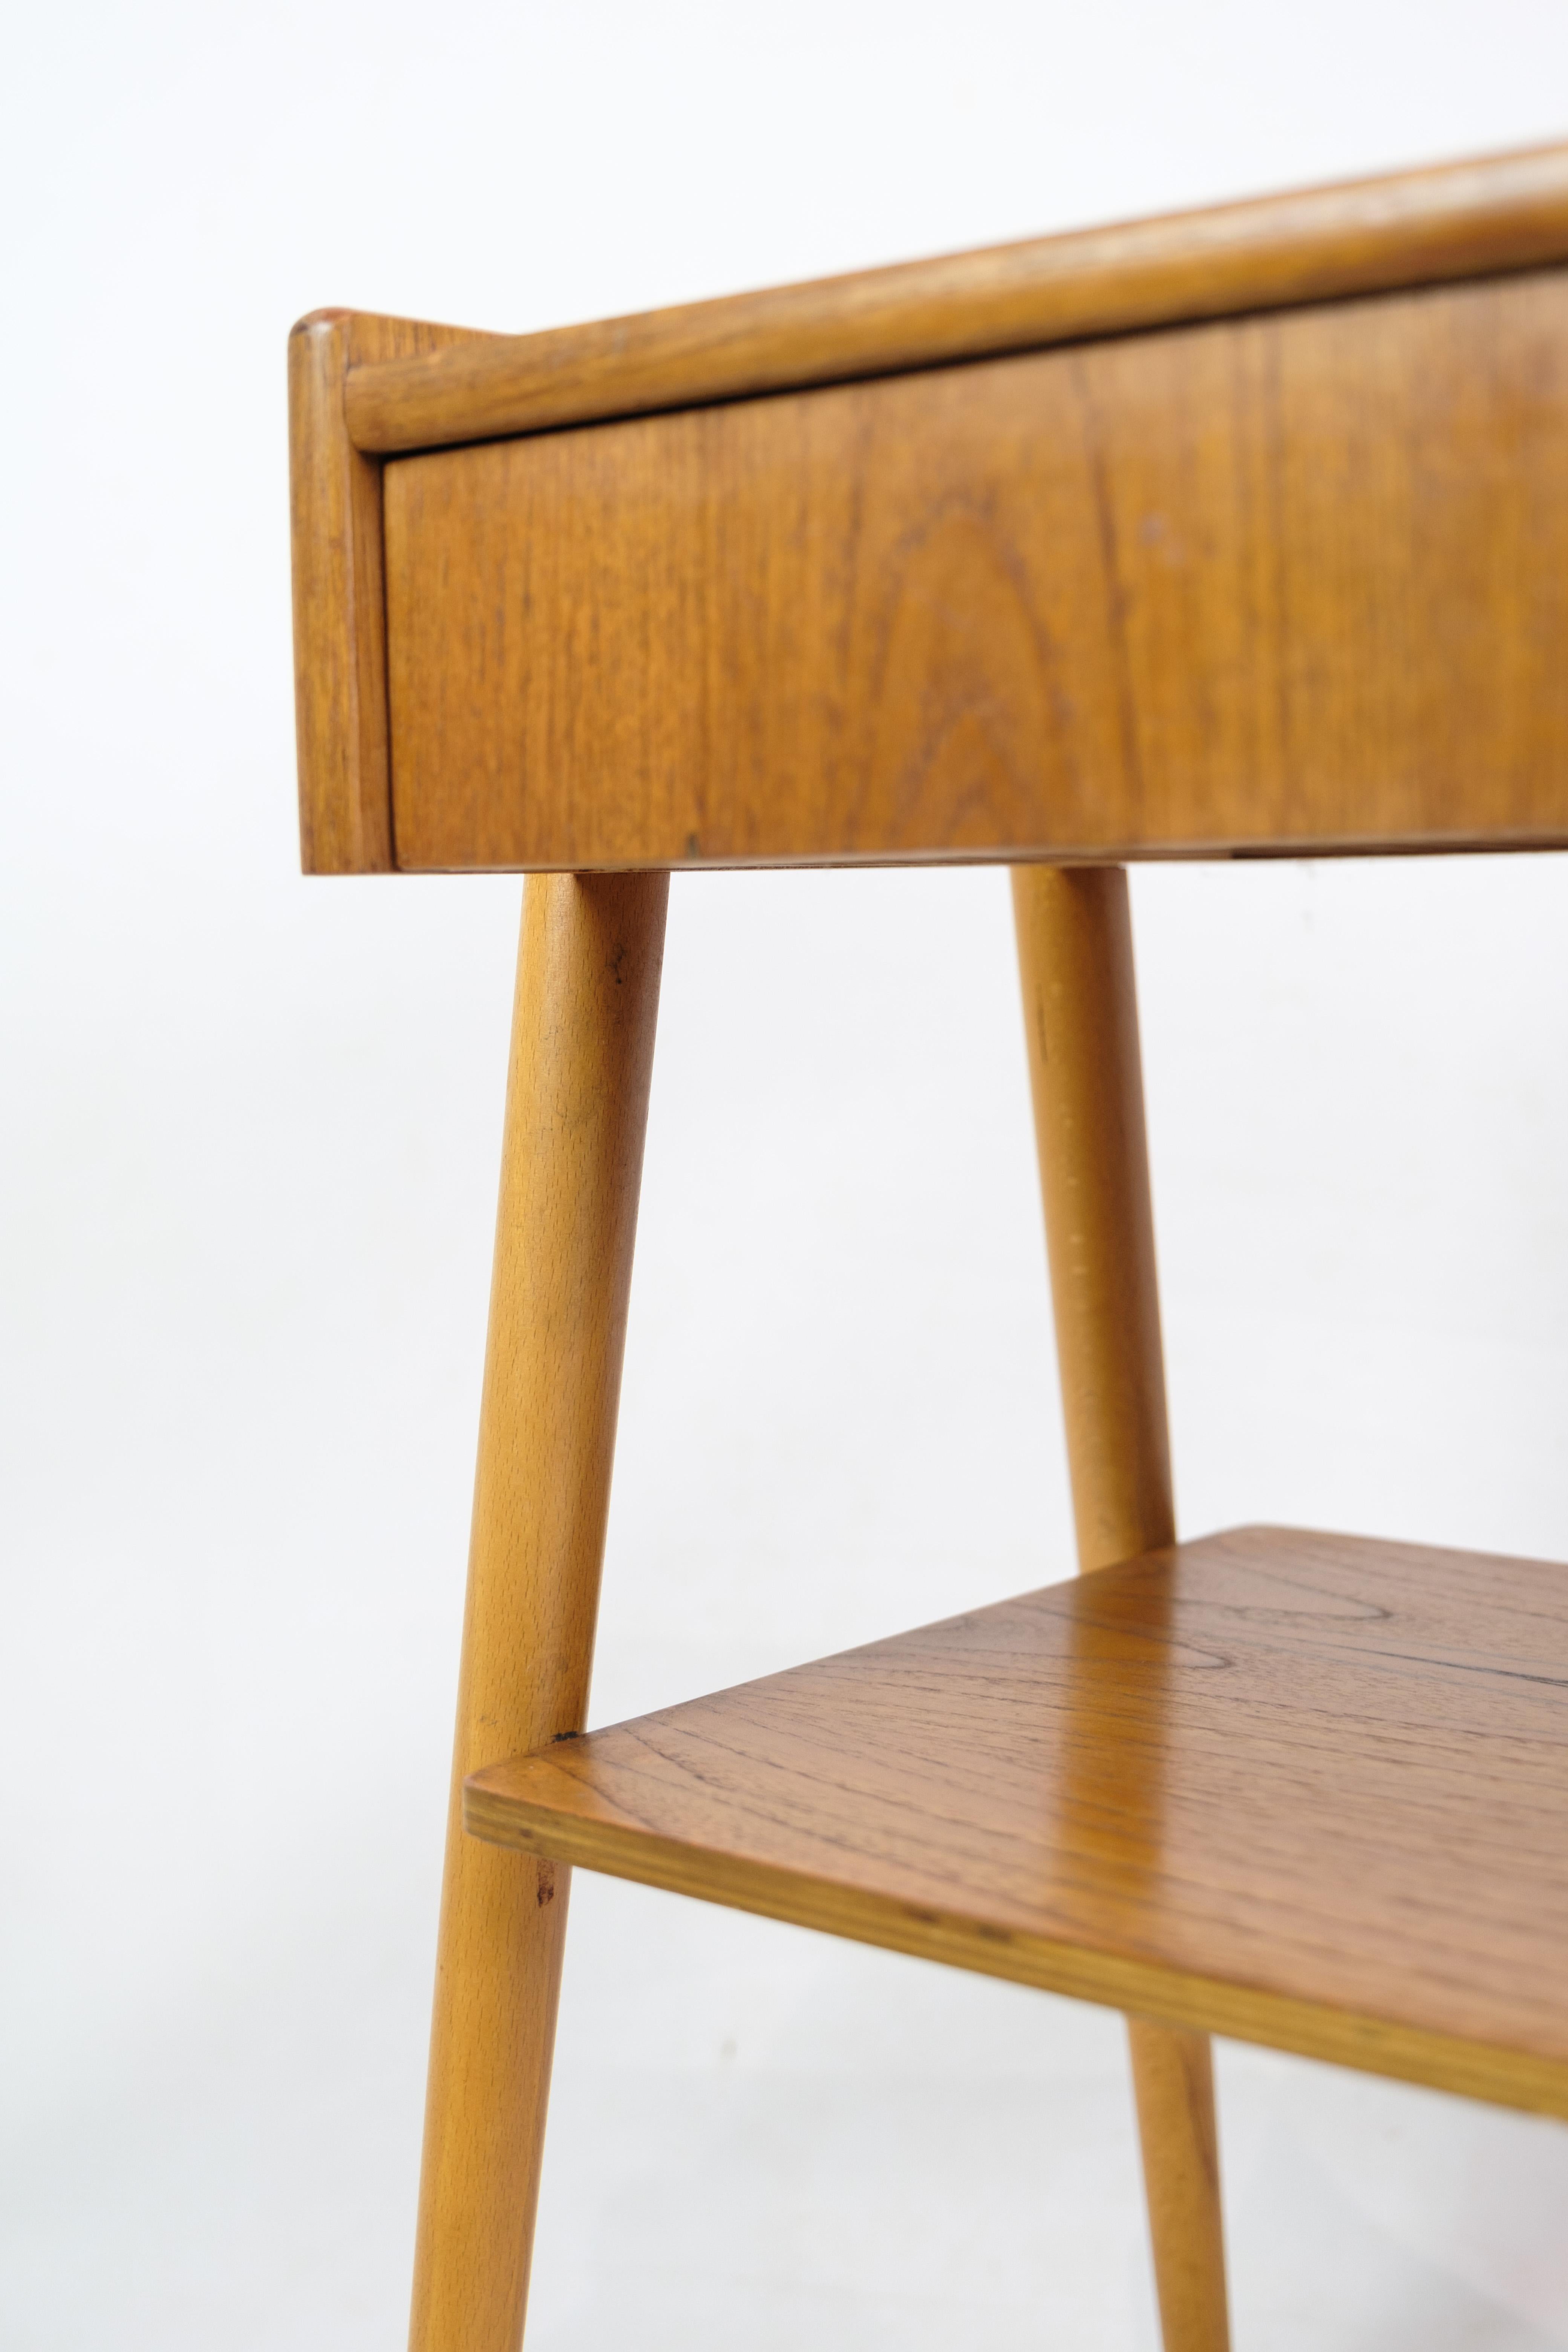 Set of Nightstands In Teak, By AB Carlström & Co Furniture Factory From 1950s For Sale 2